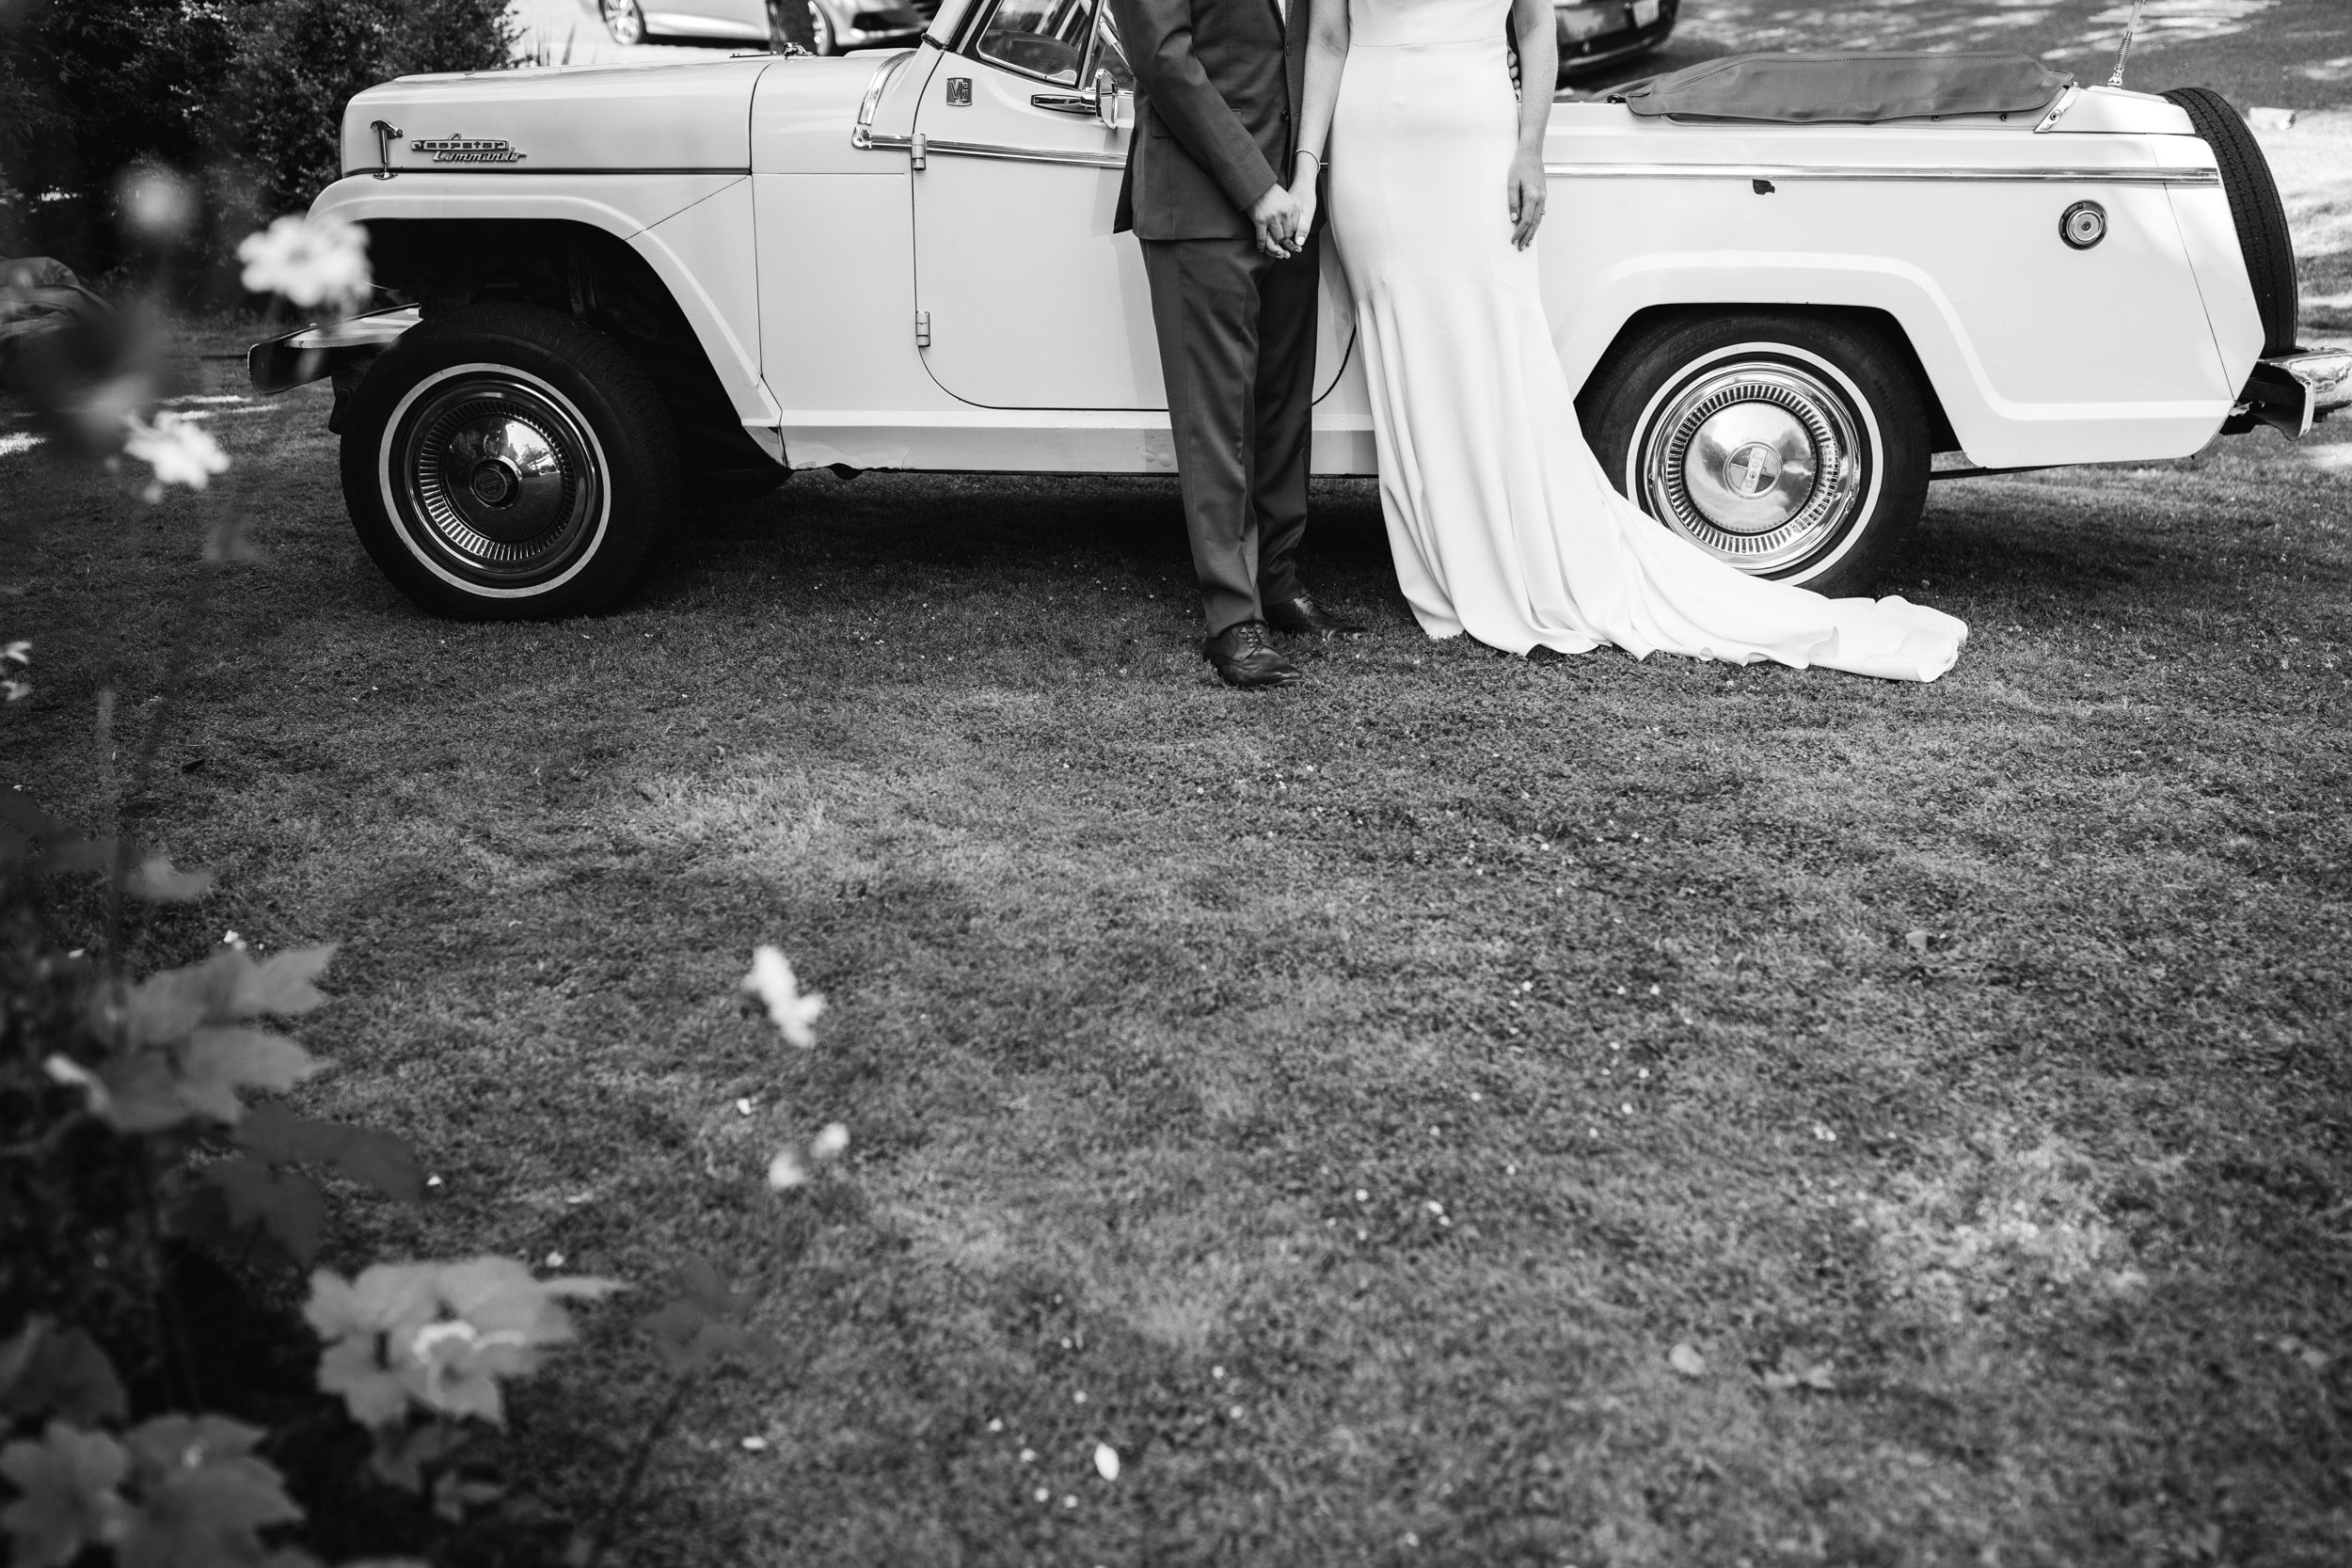 bride and groom with old car, black and white bride and groom, black and white wedding photos, old car wedding photos, get away car wedding